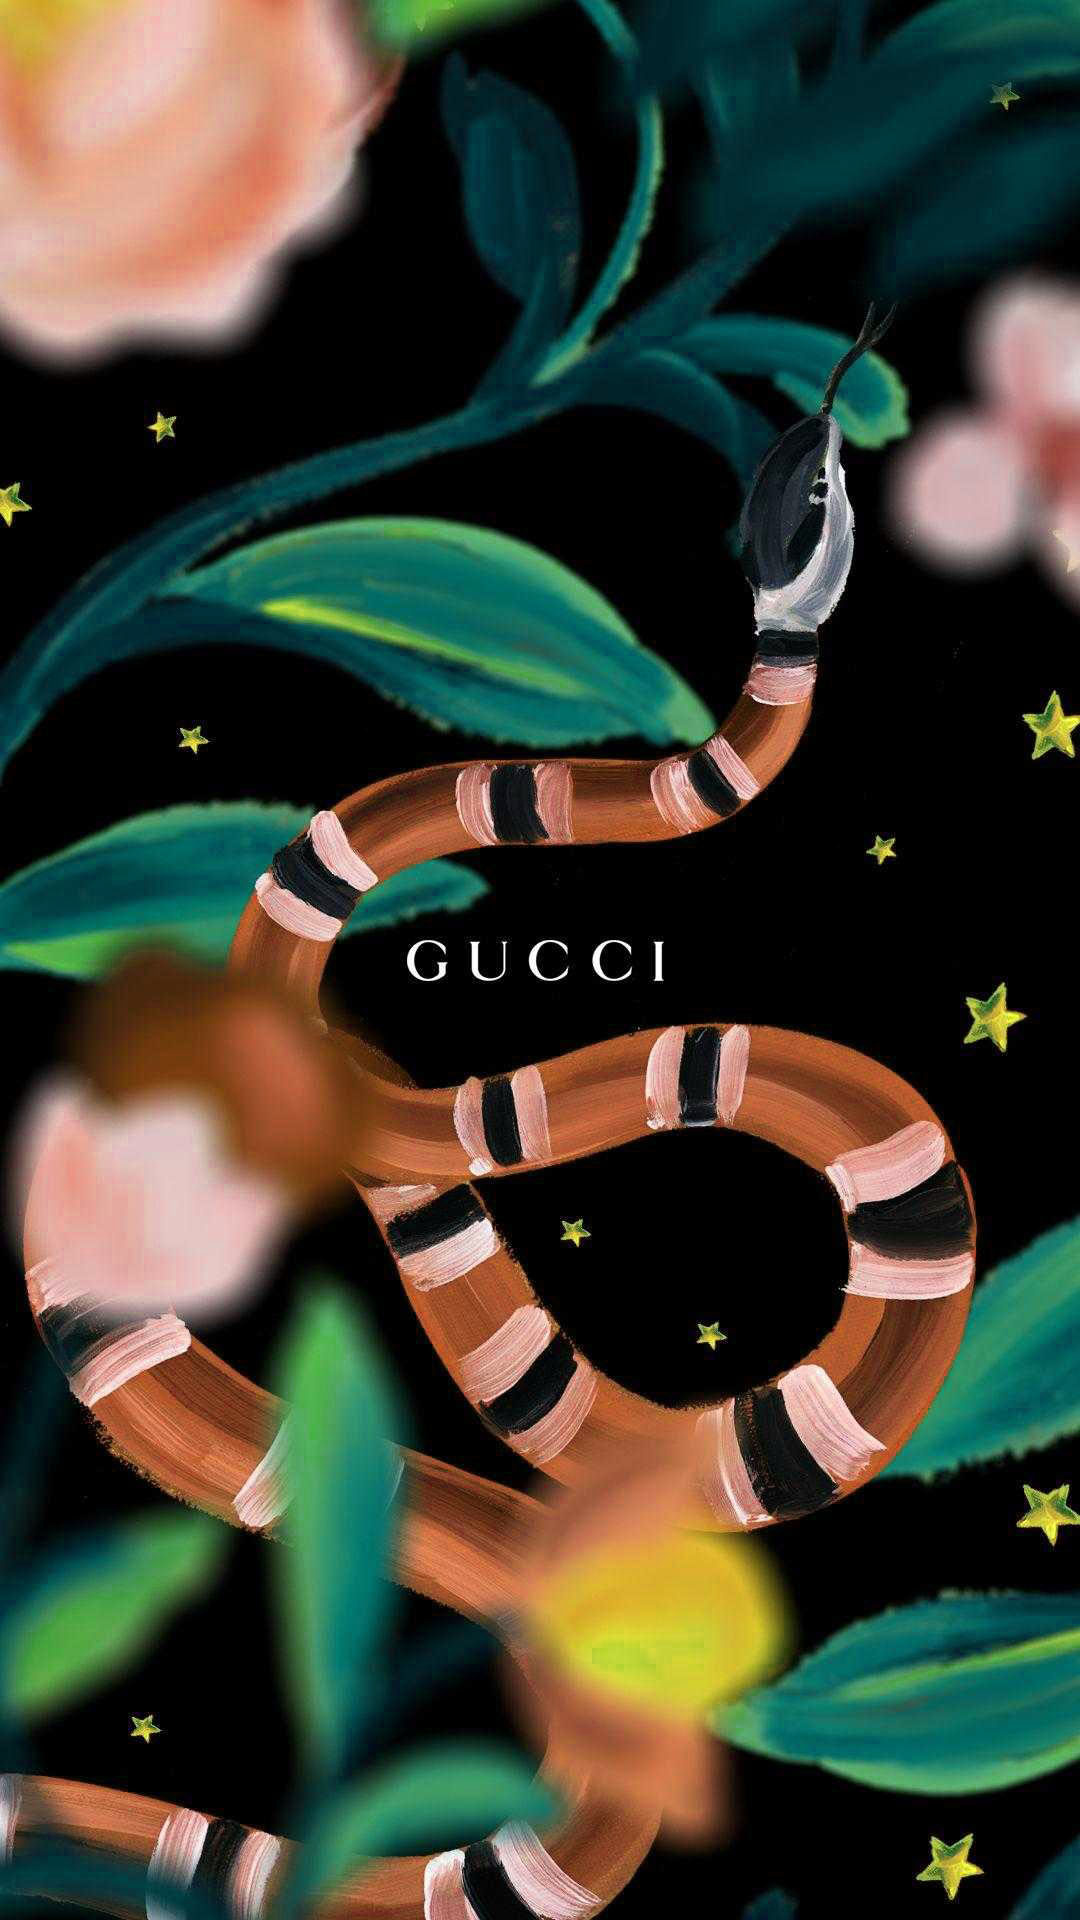 Gucci: A fashion house, Animal symbols interwoven into many of collections. 1080x1920 Full HD Wallpaper.